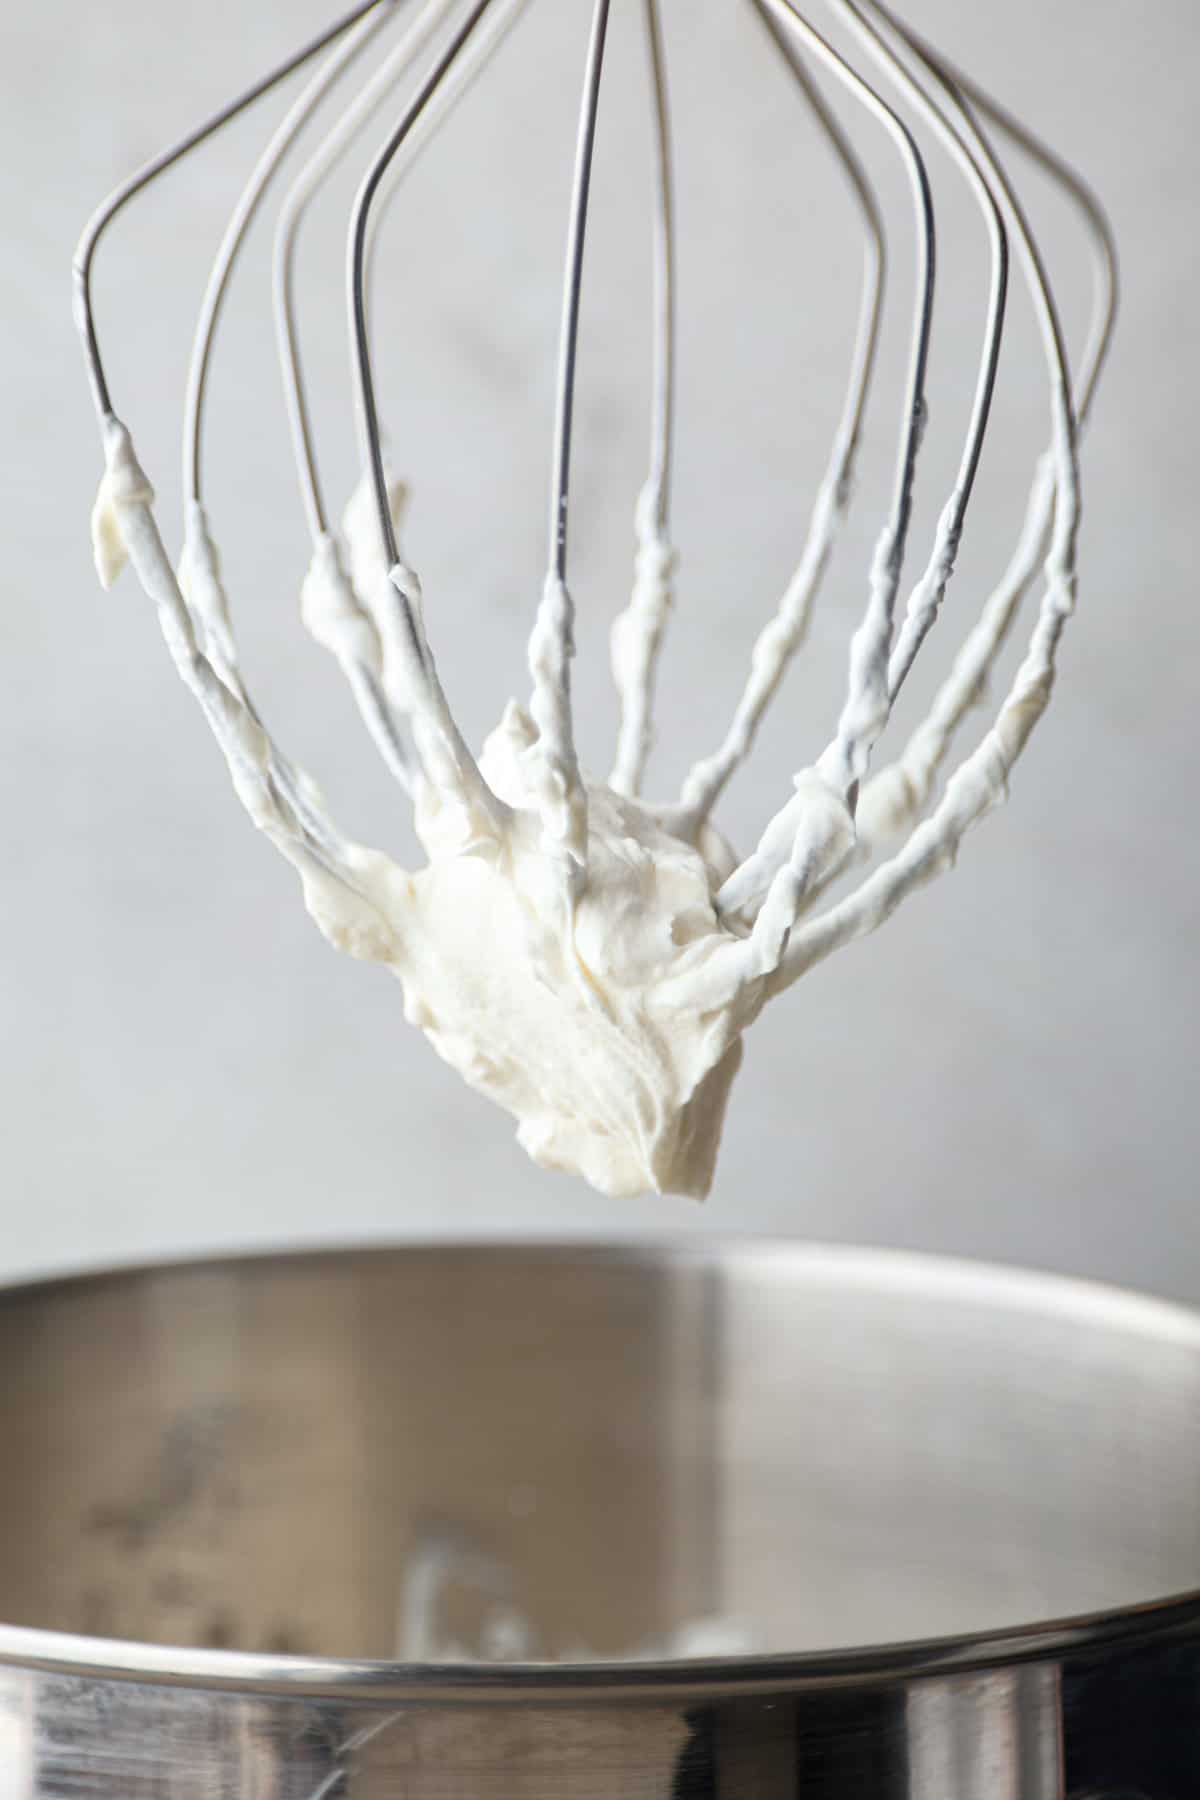 Stand Mixer Testing: Whipped Cream 